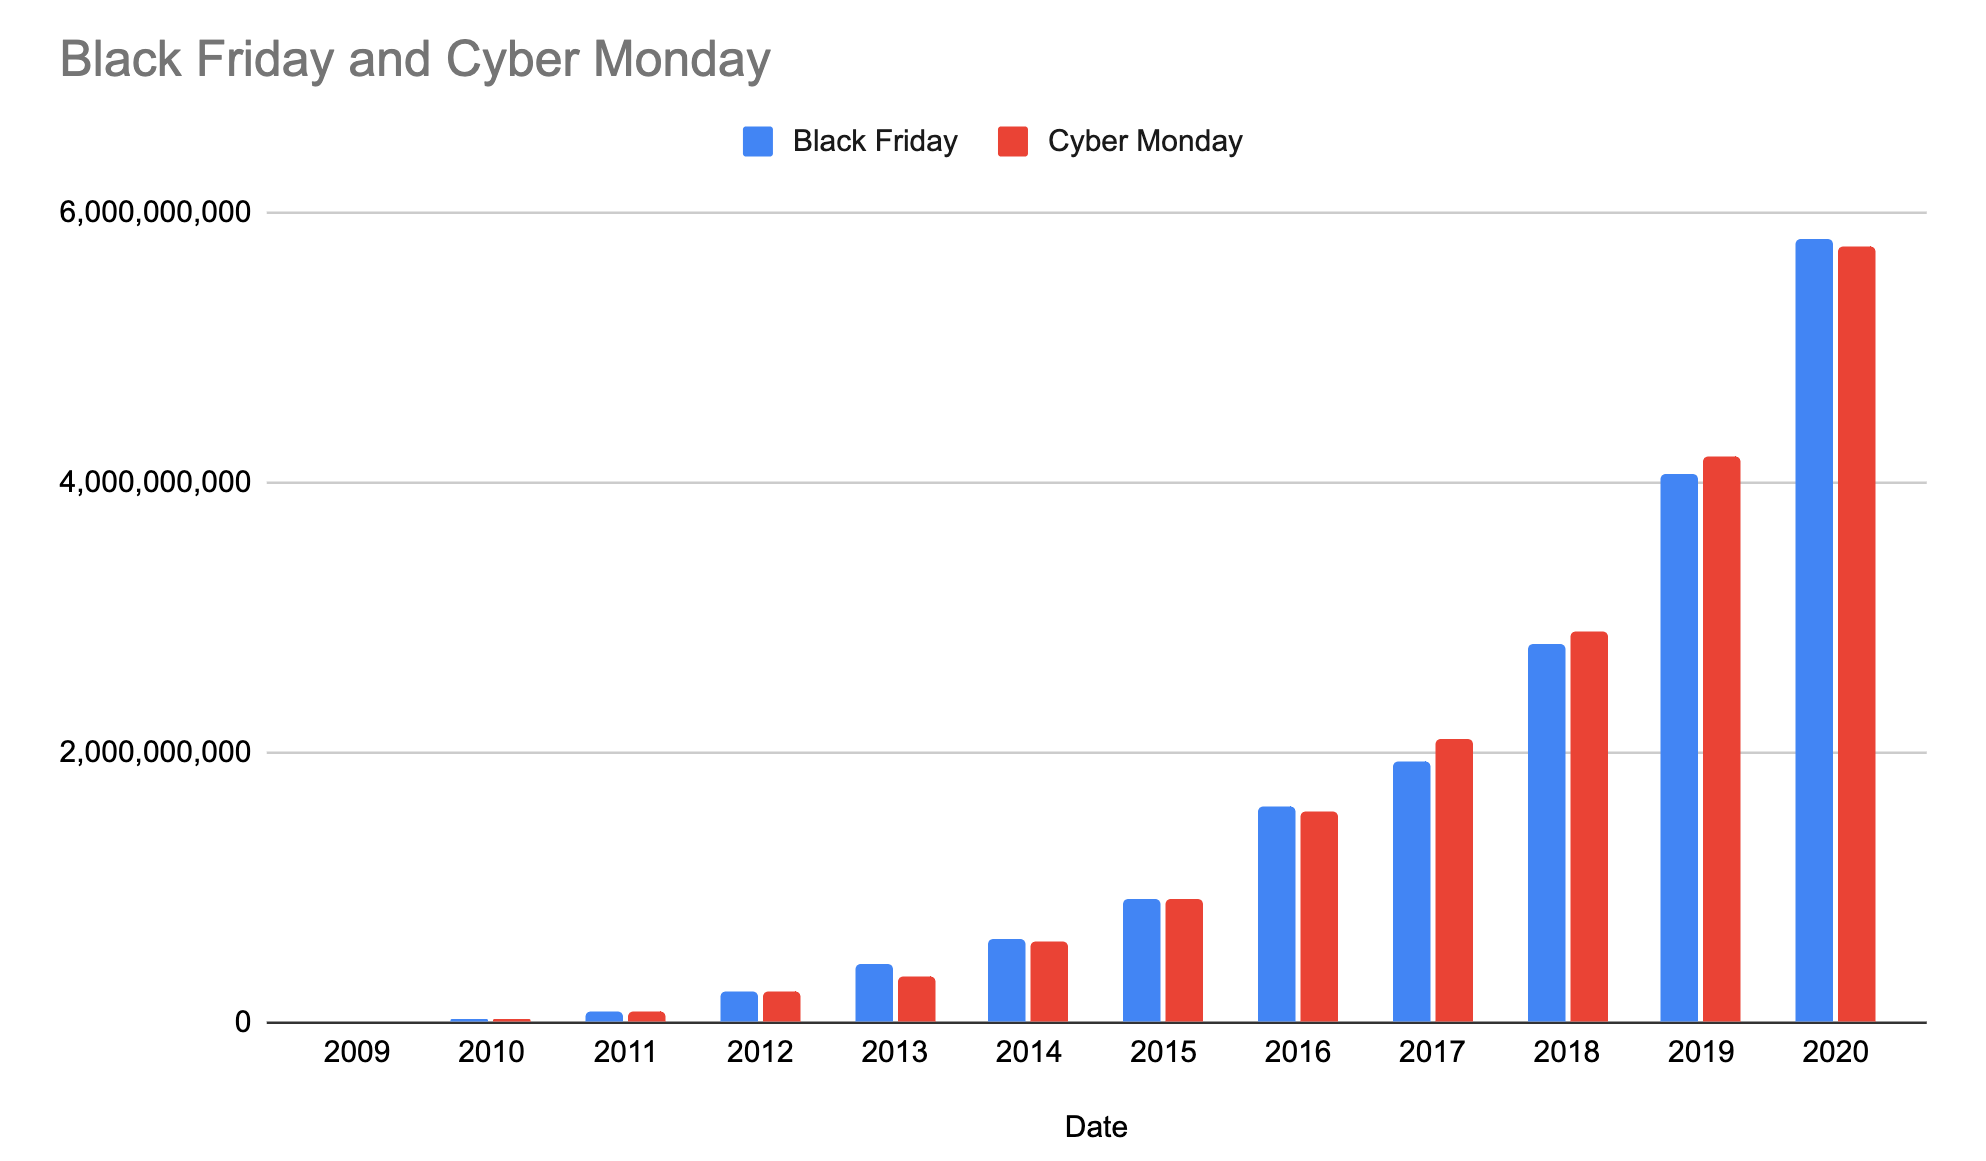 Black Friday and Cyber Monday Volume